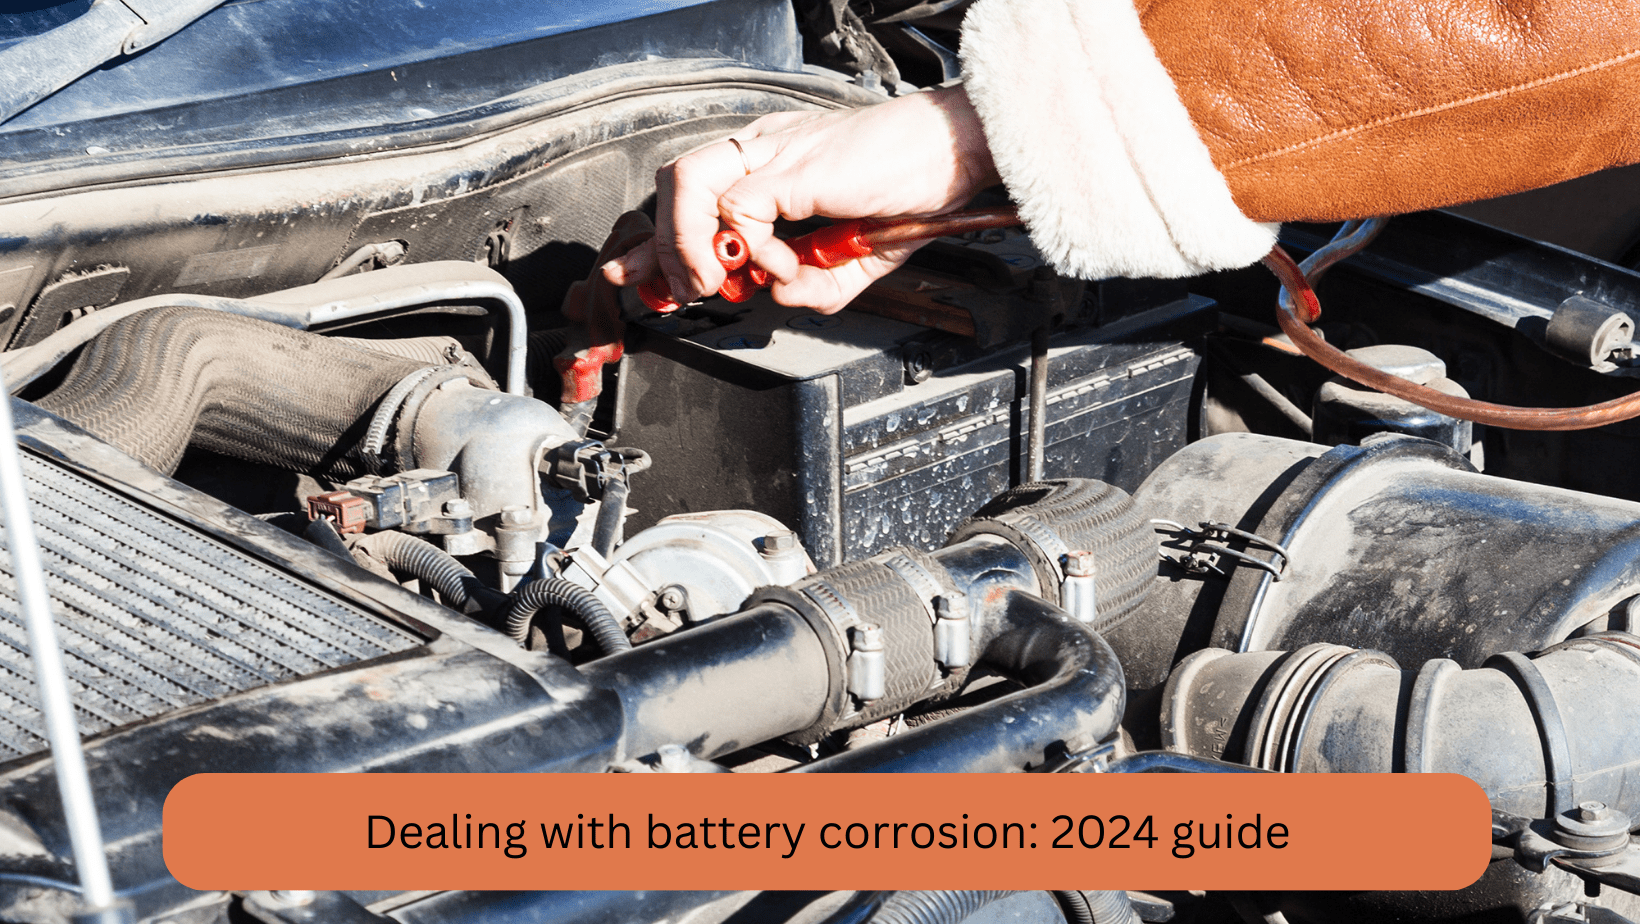 Dealing with battery corrosion, the smart way